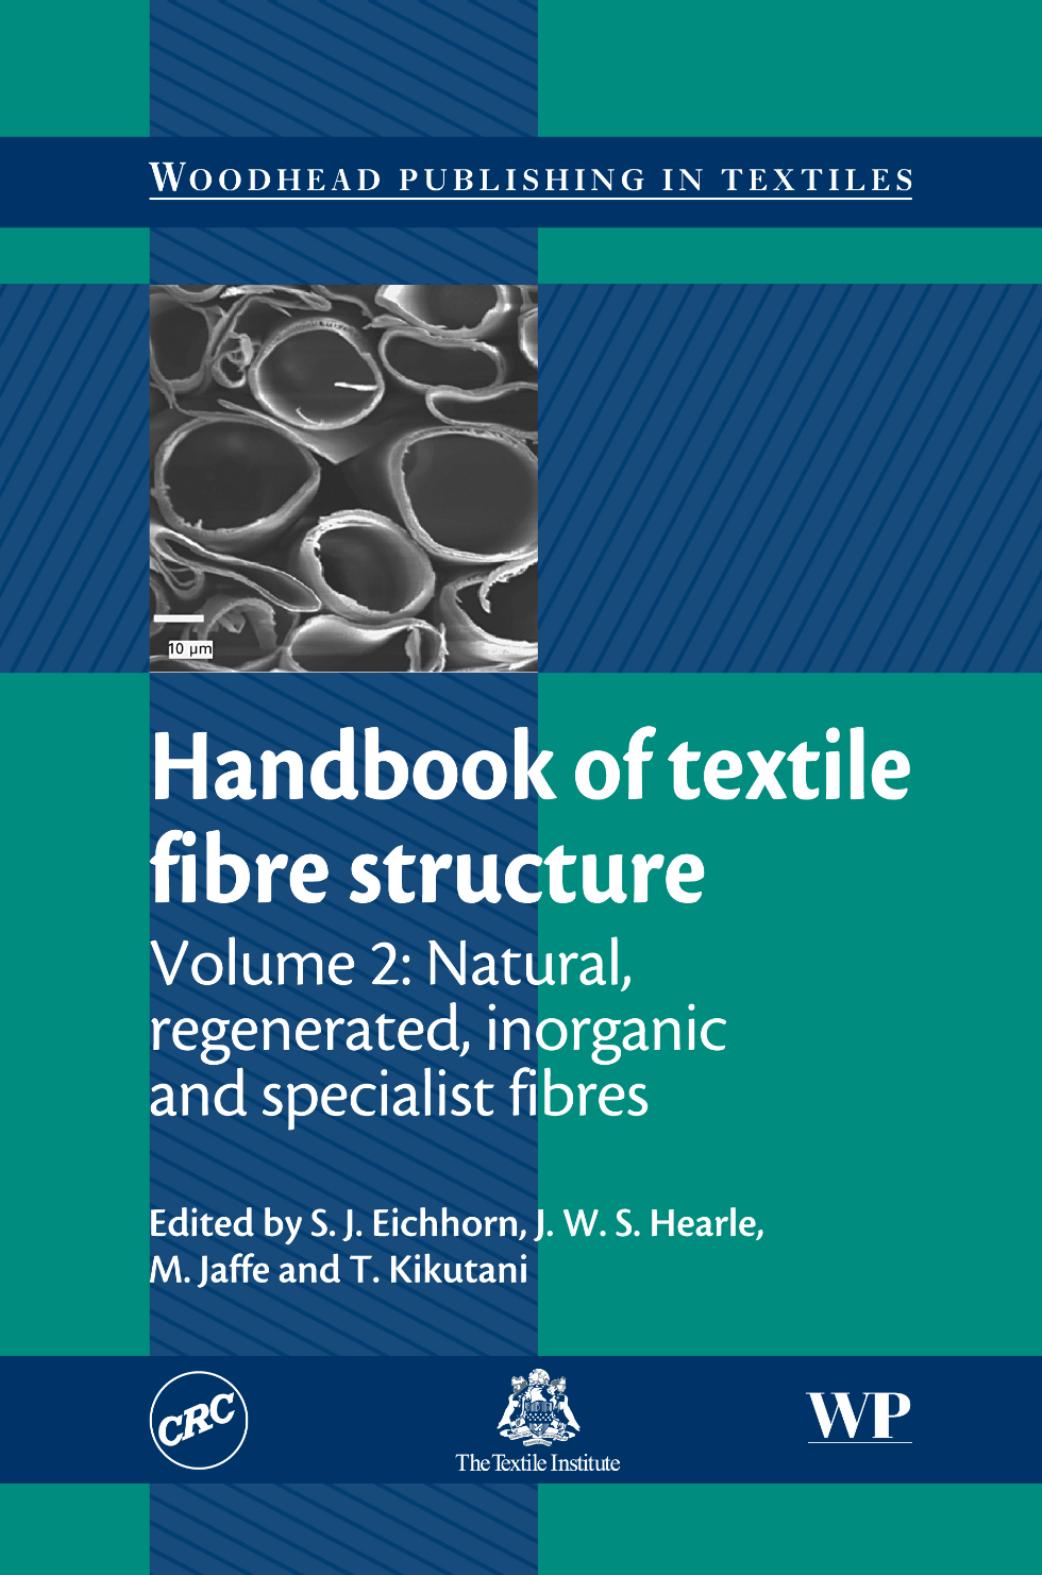 Handbook of Textile Fibre Structure, Volume 2 Natural, Regenerated, Inorganic, and Specialist2009